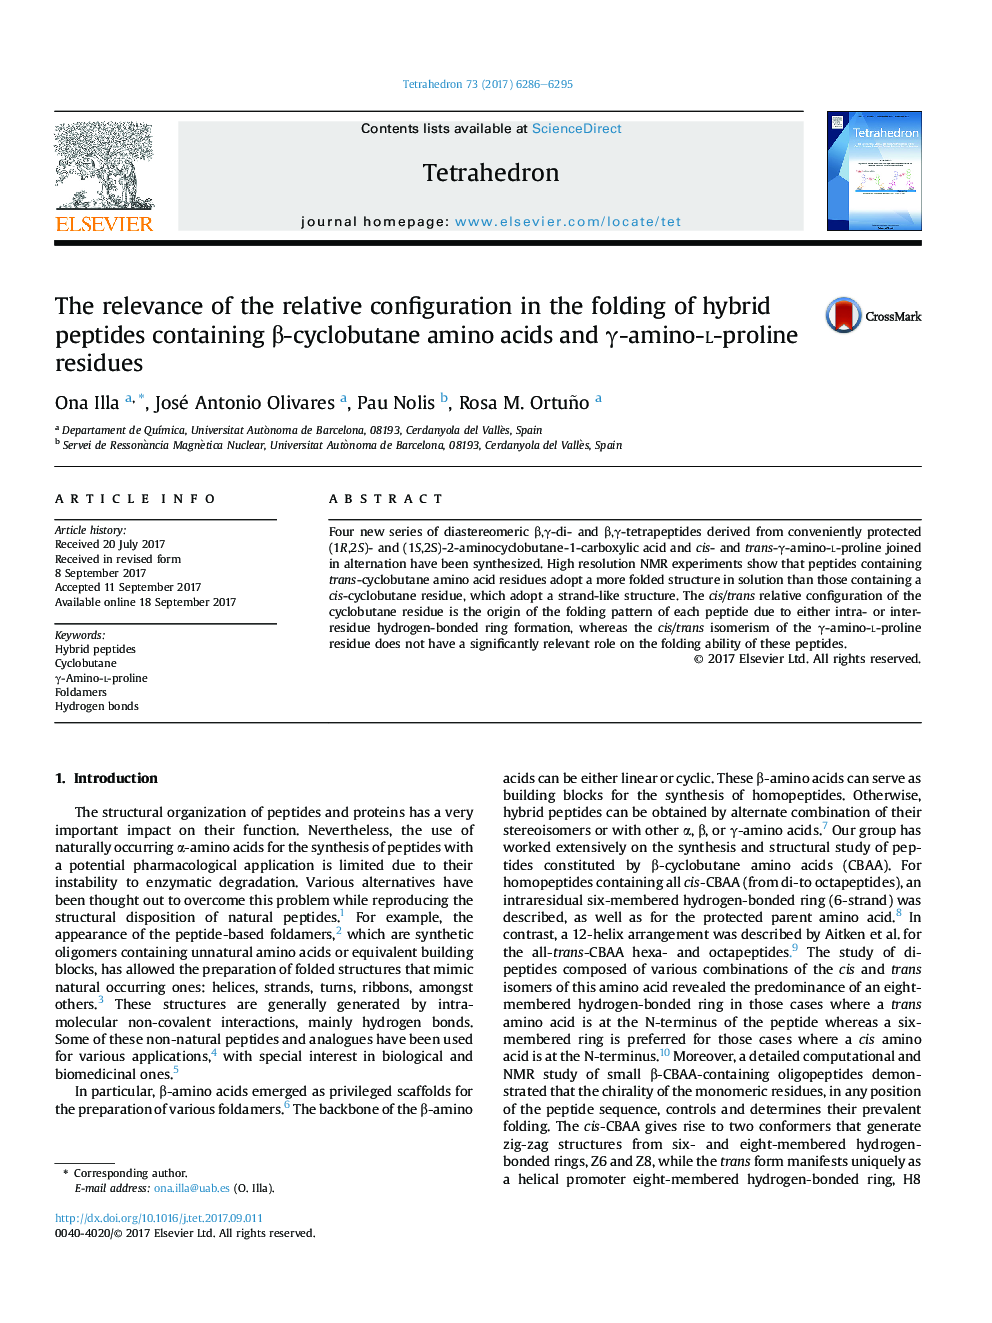 The relevance of the relative configuration in the folding of hybrid peptides containing Î²-cyclobutane amino acids and Î³-amino-l-proline residues